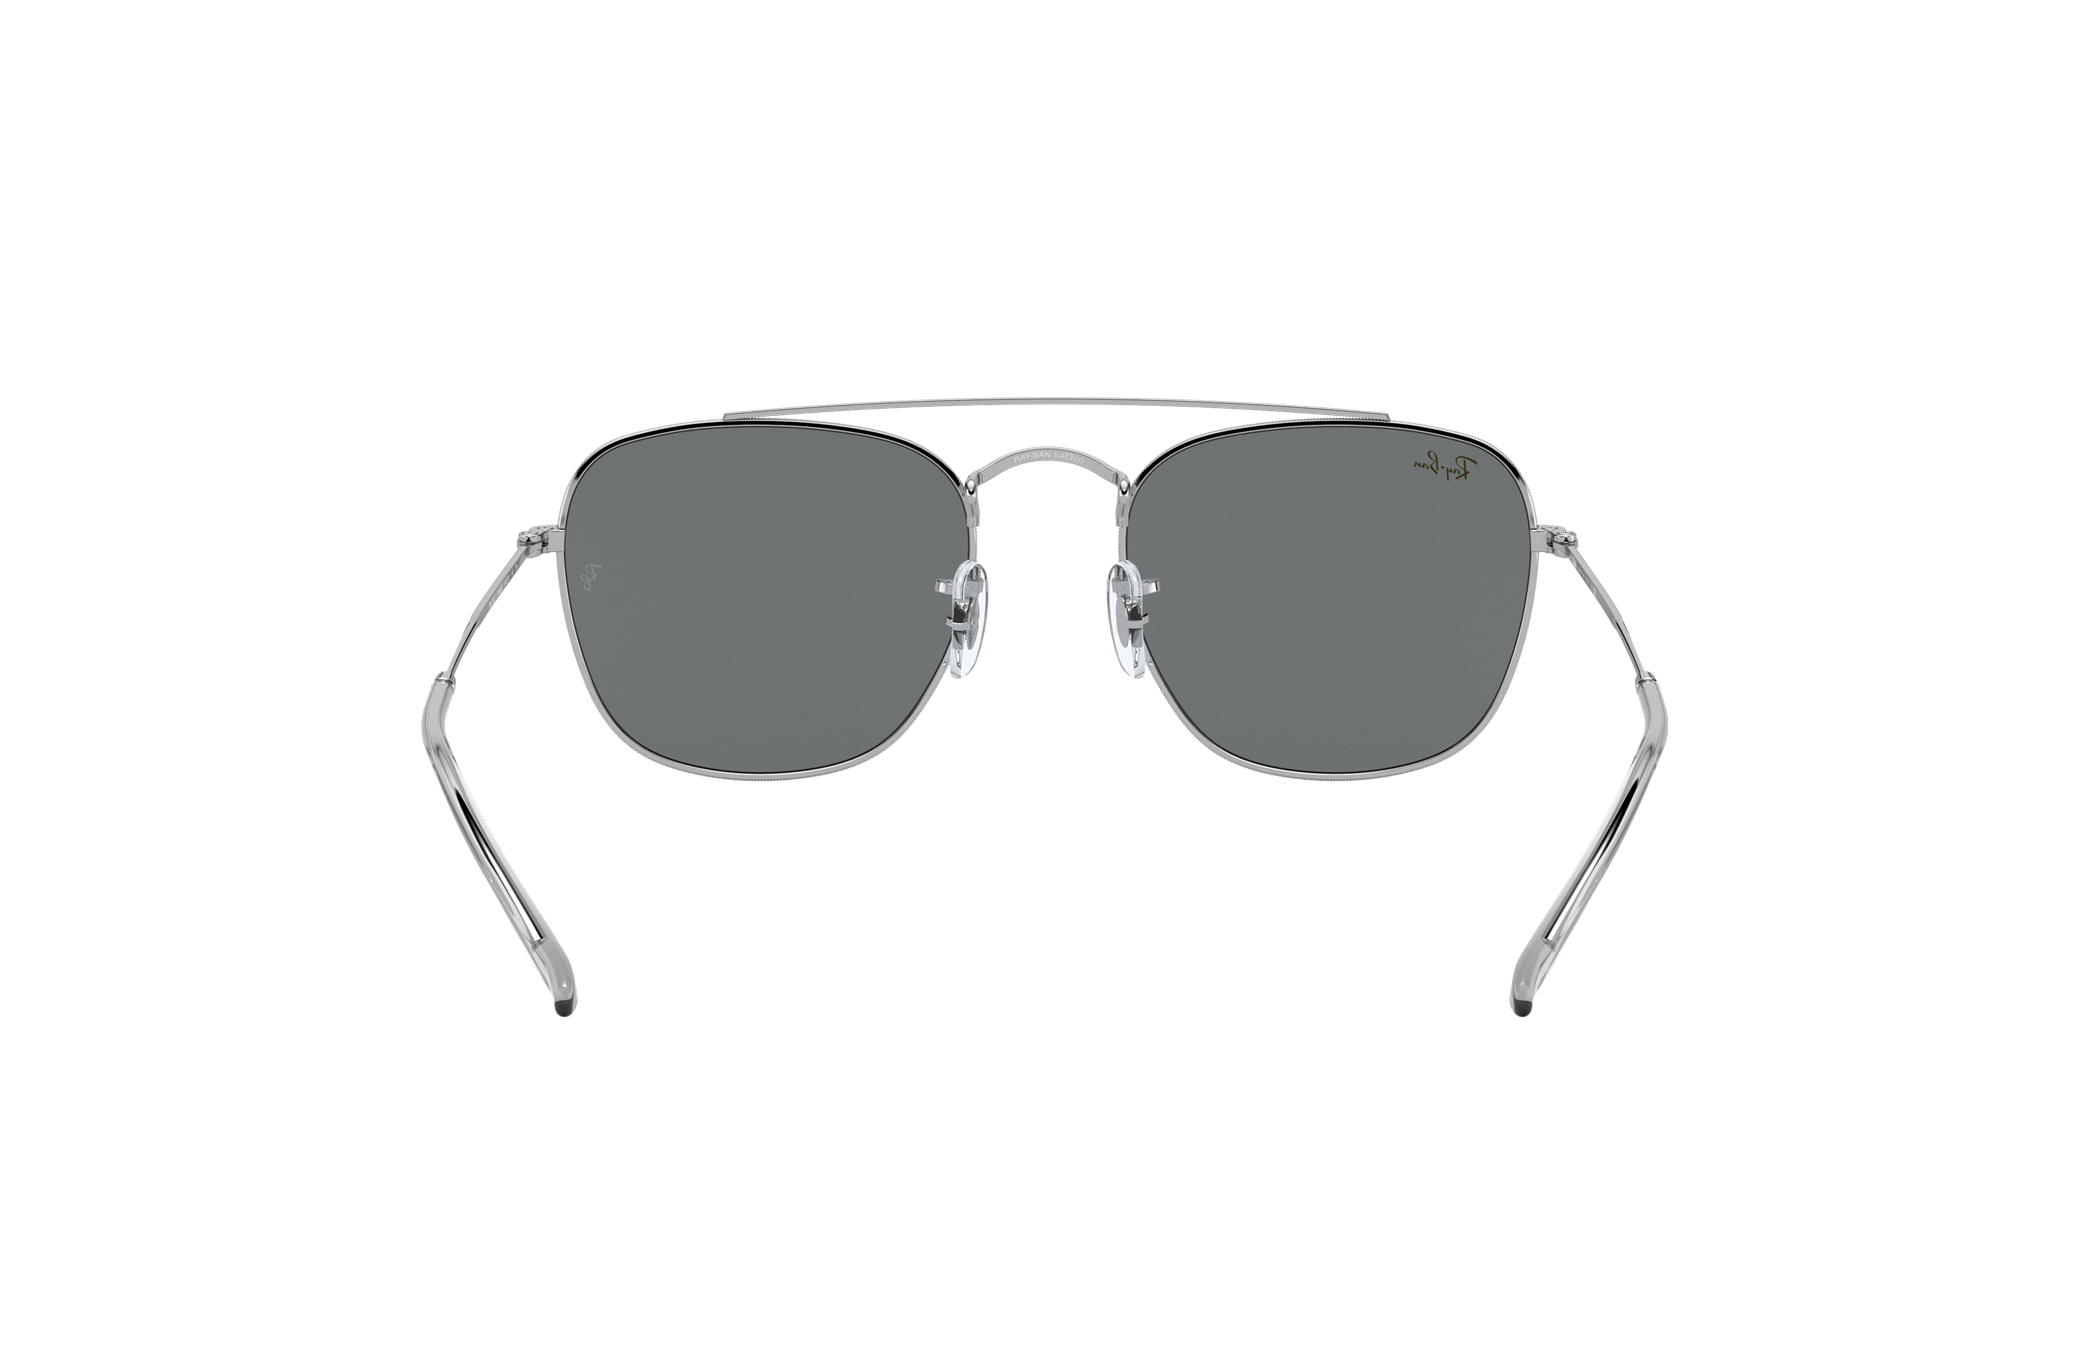 Rb3557 Sunglasses in Silver and Dark Grey - RB3557 | Ray-Ban® AU